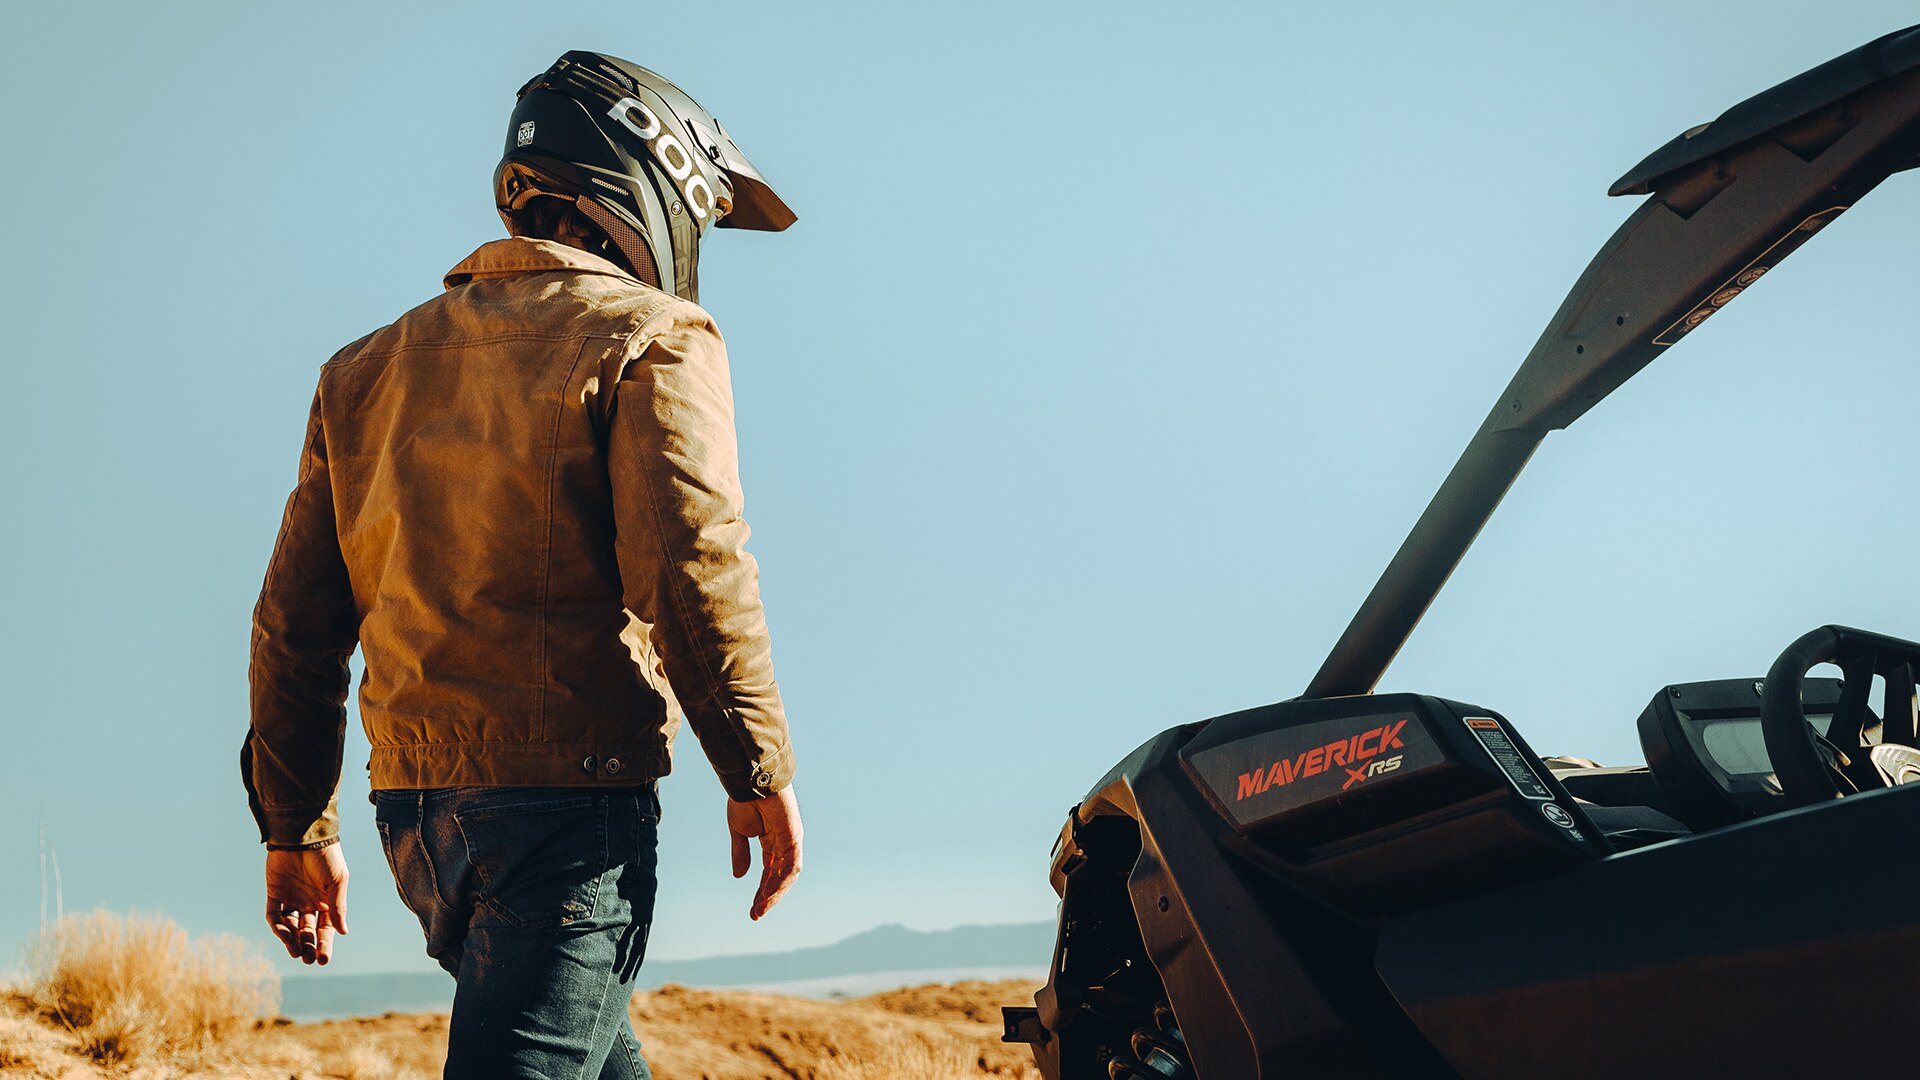 DO YOU NEED A LICENSE TO DRIVE AN ATV OR SXS?